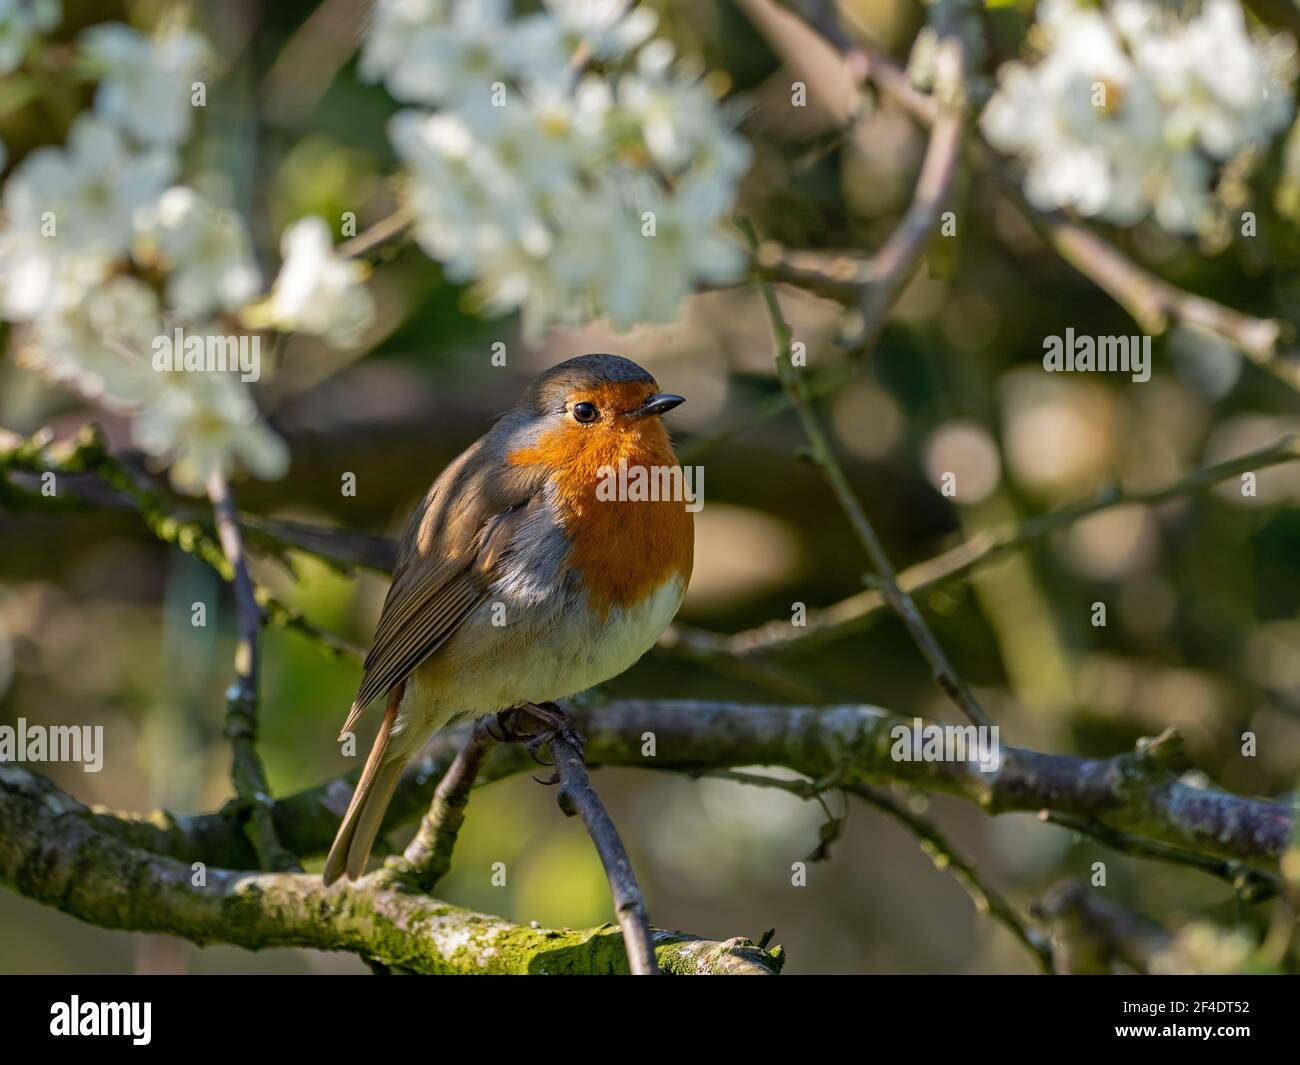 European or Eurasian Robin in dappled sunlight, perched in plum tree with white blossom. Stock Photo